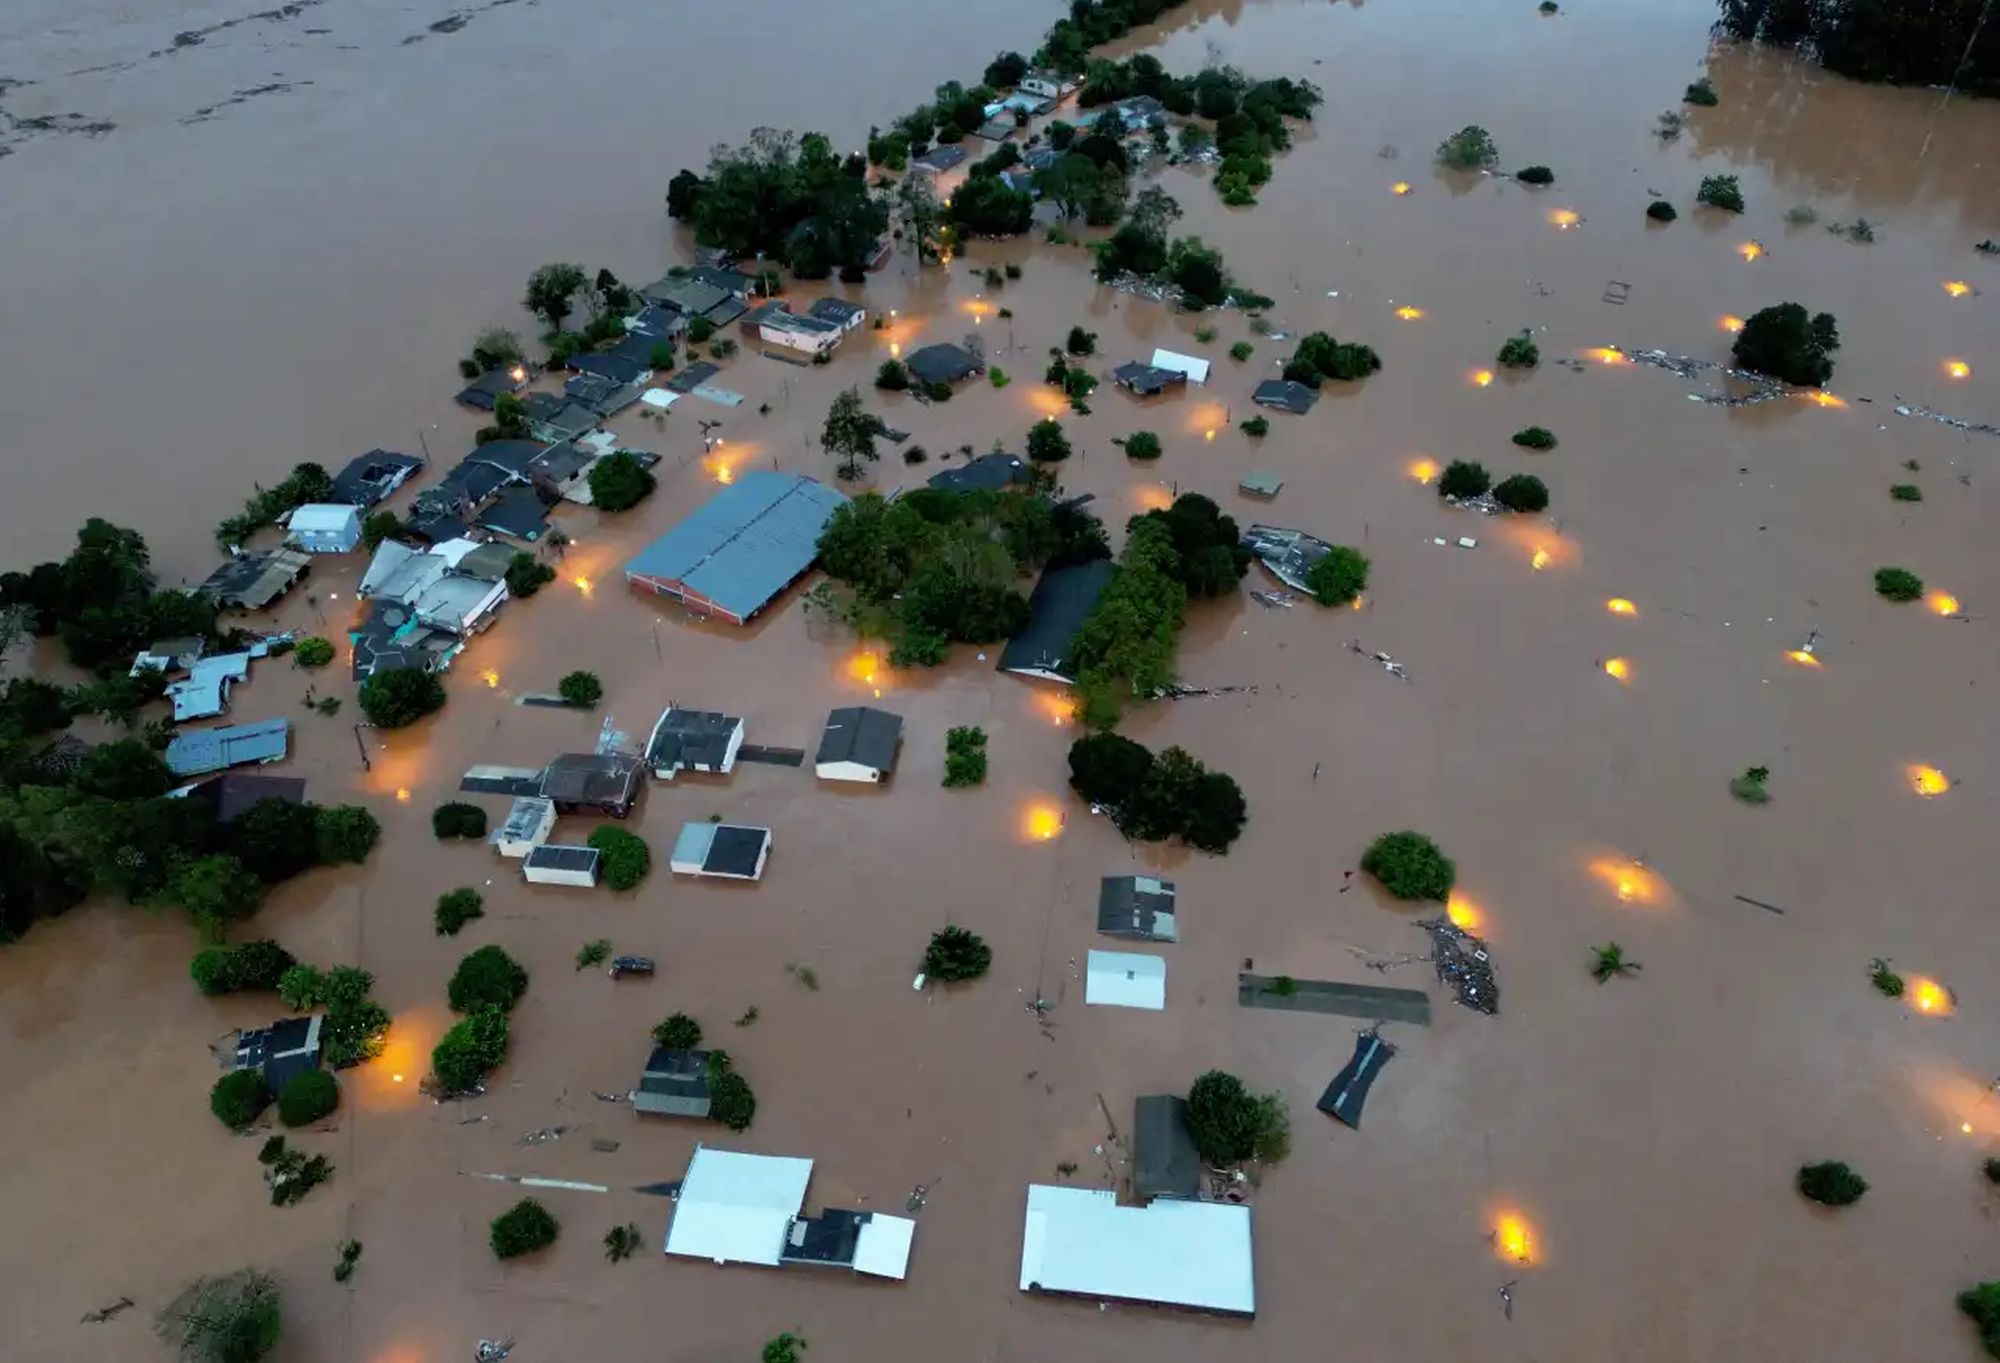 More than 350 municipalities have been affected by the heavy rains in Rio Grande do Sul